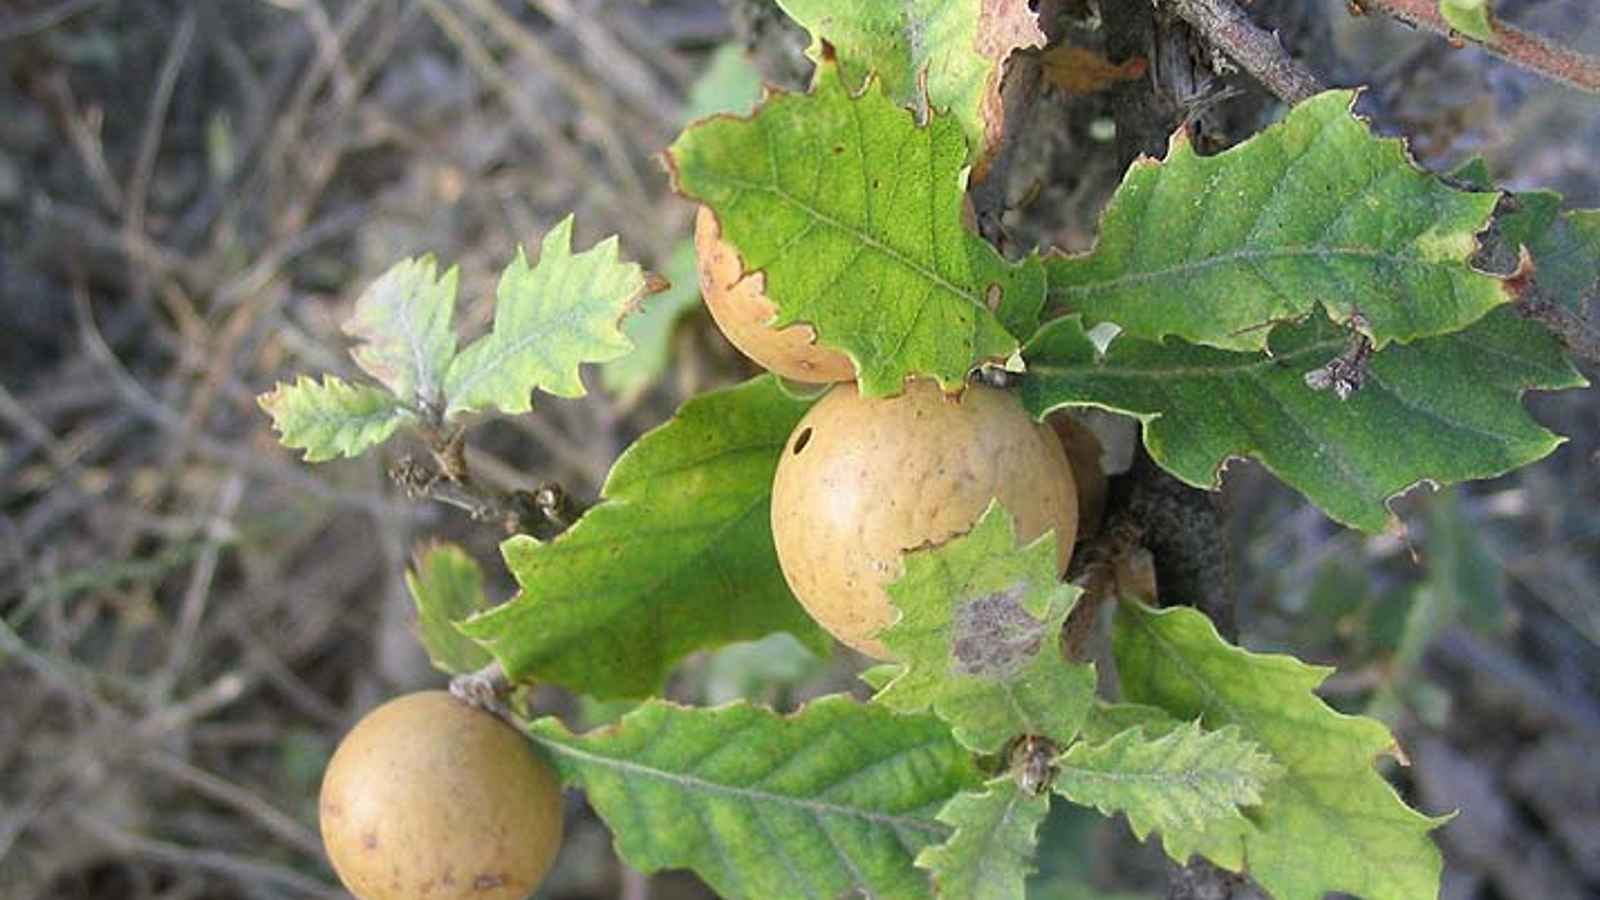 Oak Apple Day 2023: Date, History, Facts, Activities